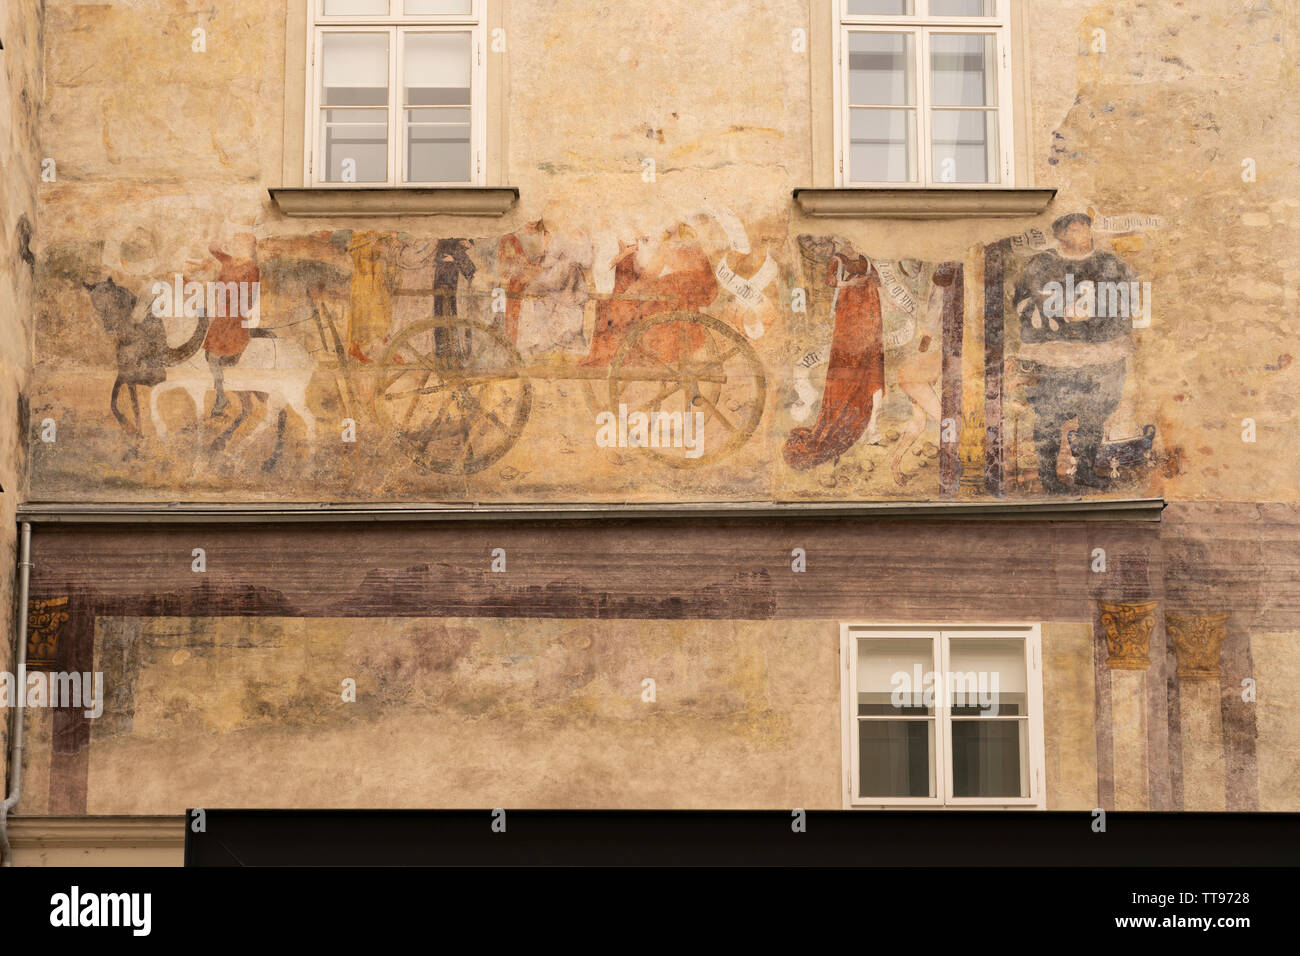 Murals on the outside of a house in Krems an der Donau town centre dating back to the middle ages, showing a horse drawn cart and seated figures Stock Photo